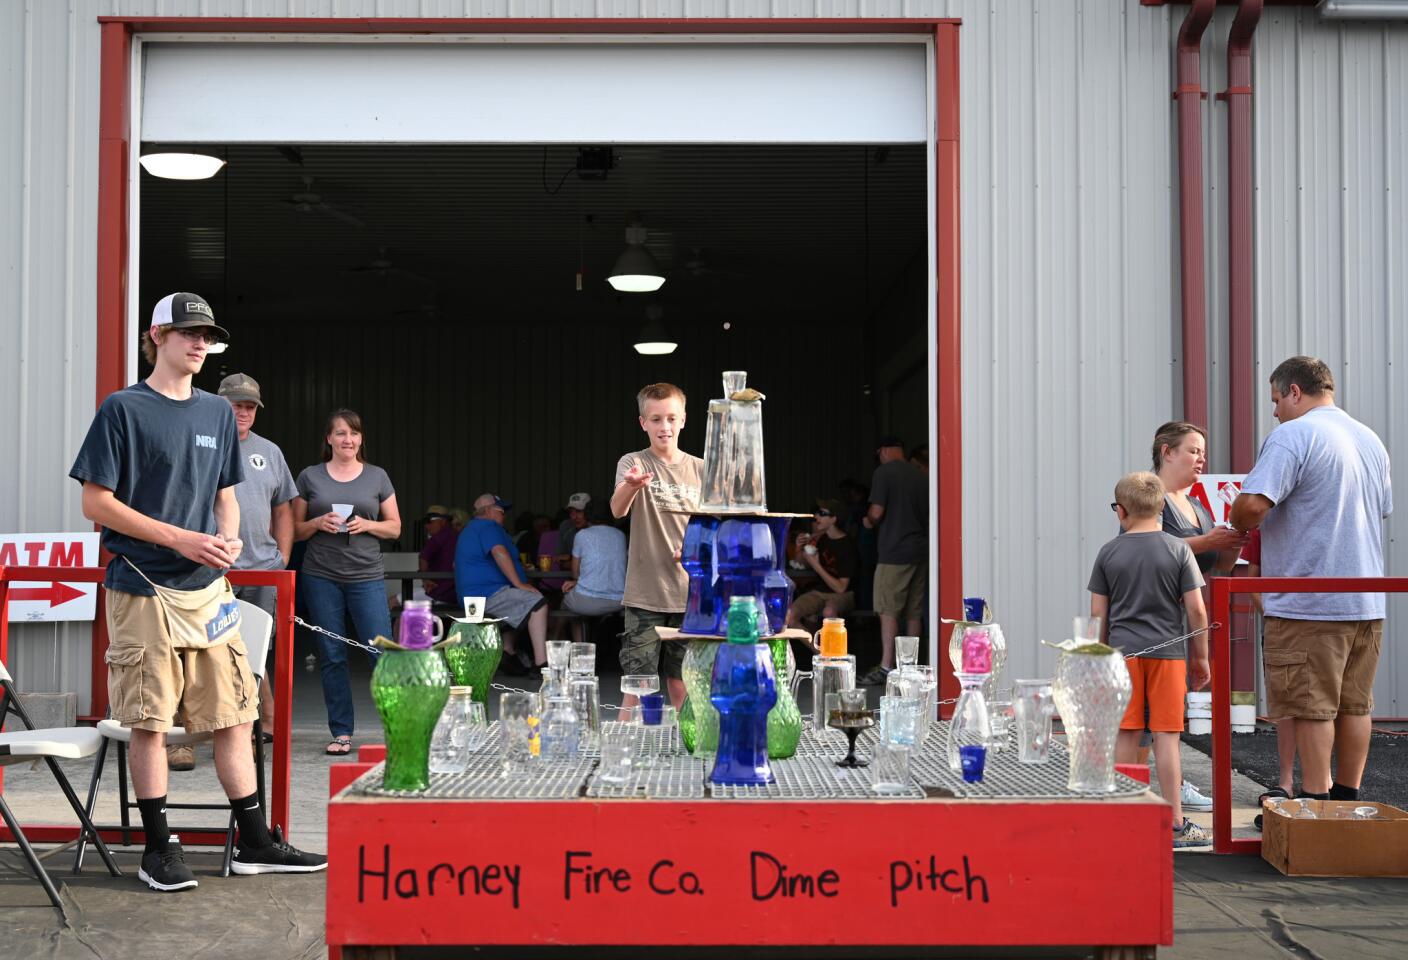 People try their luck at the dime pitch game during the carnival at the Harney Volunteer Fire Company on Tuesday, June 25.